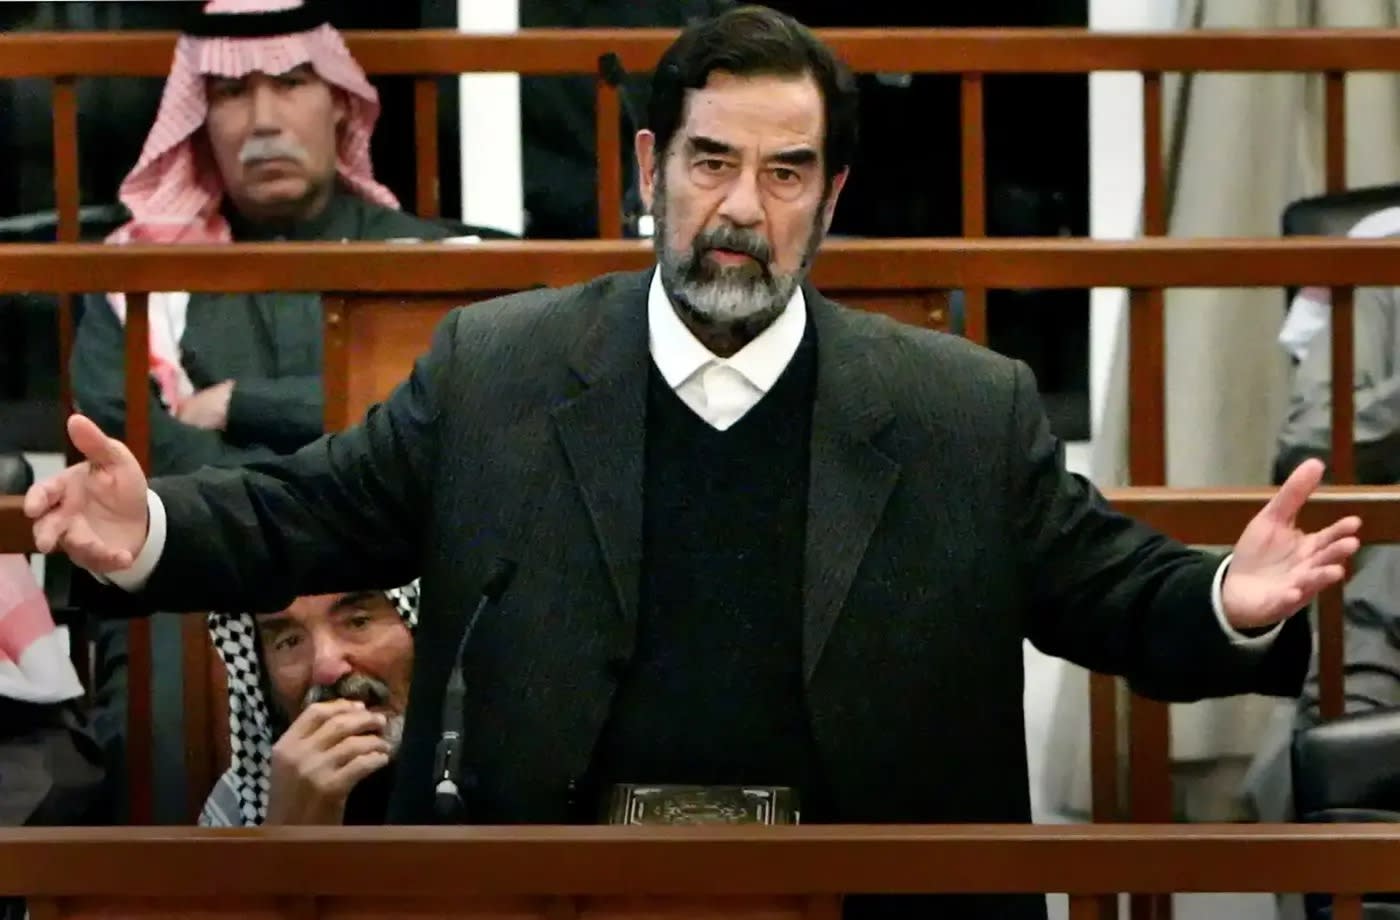  Former Iraqi dictator Saddam Hussein speaks during his trial in Baghdad (credit: REUTERS)